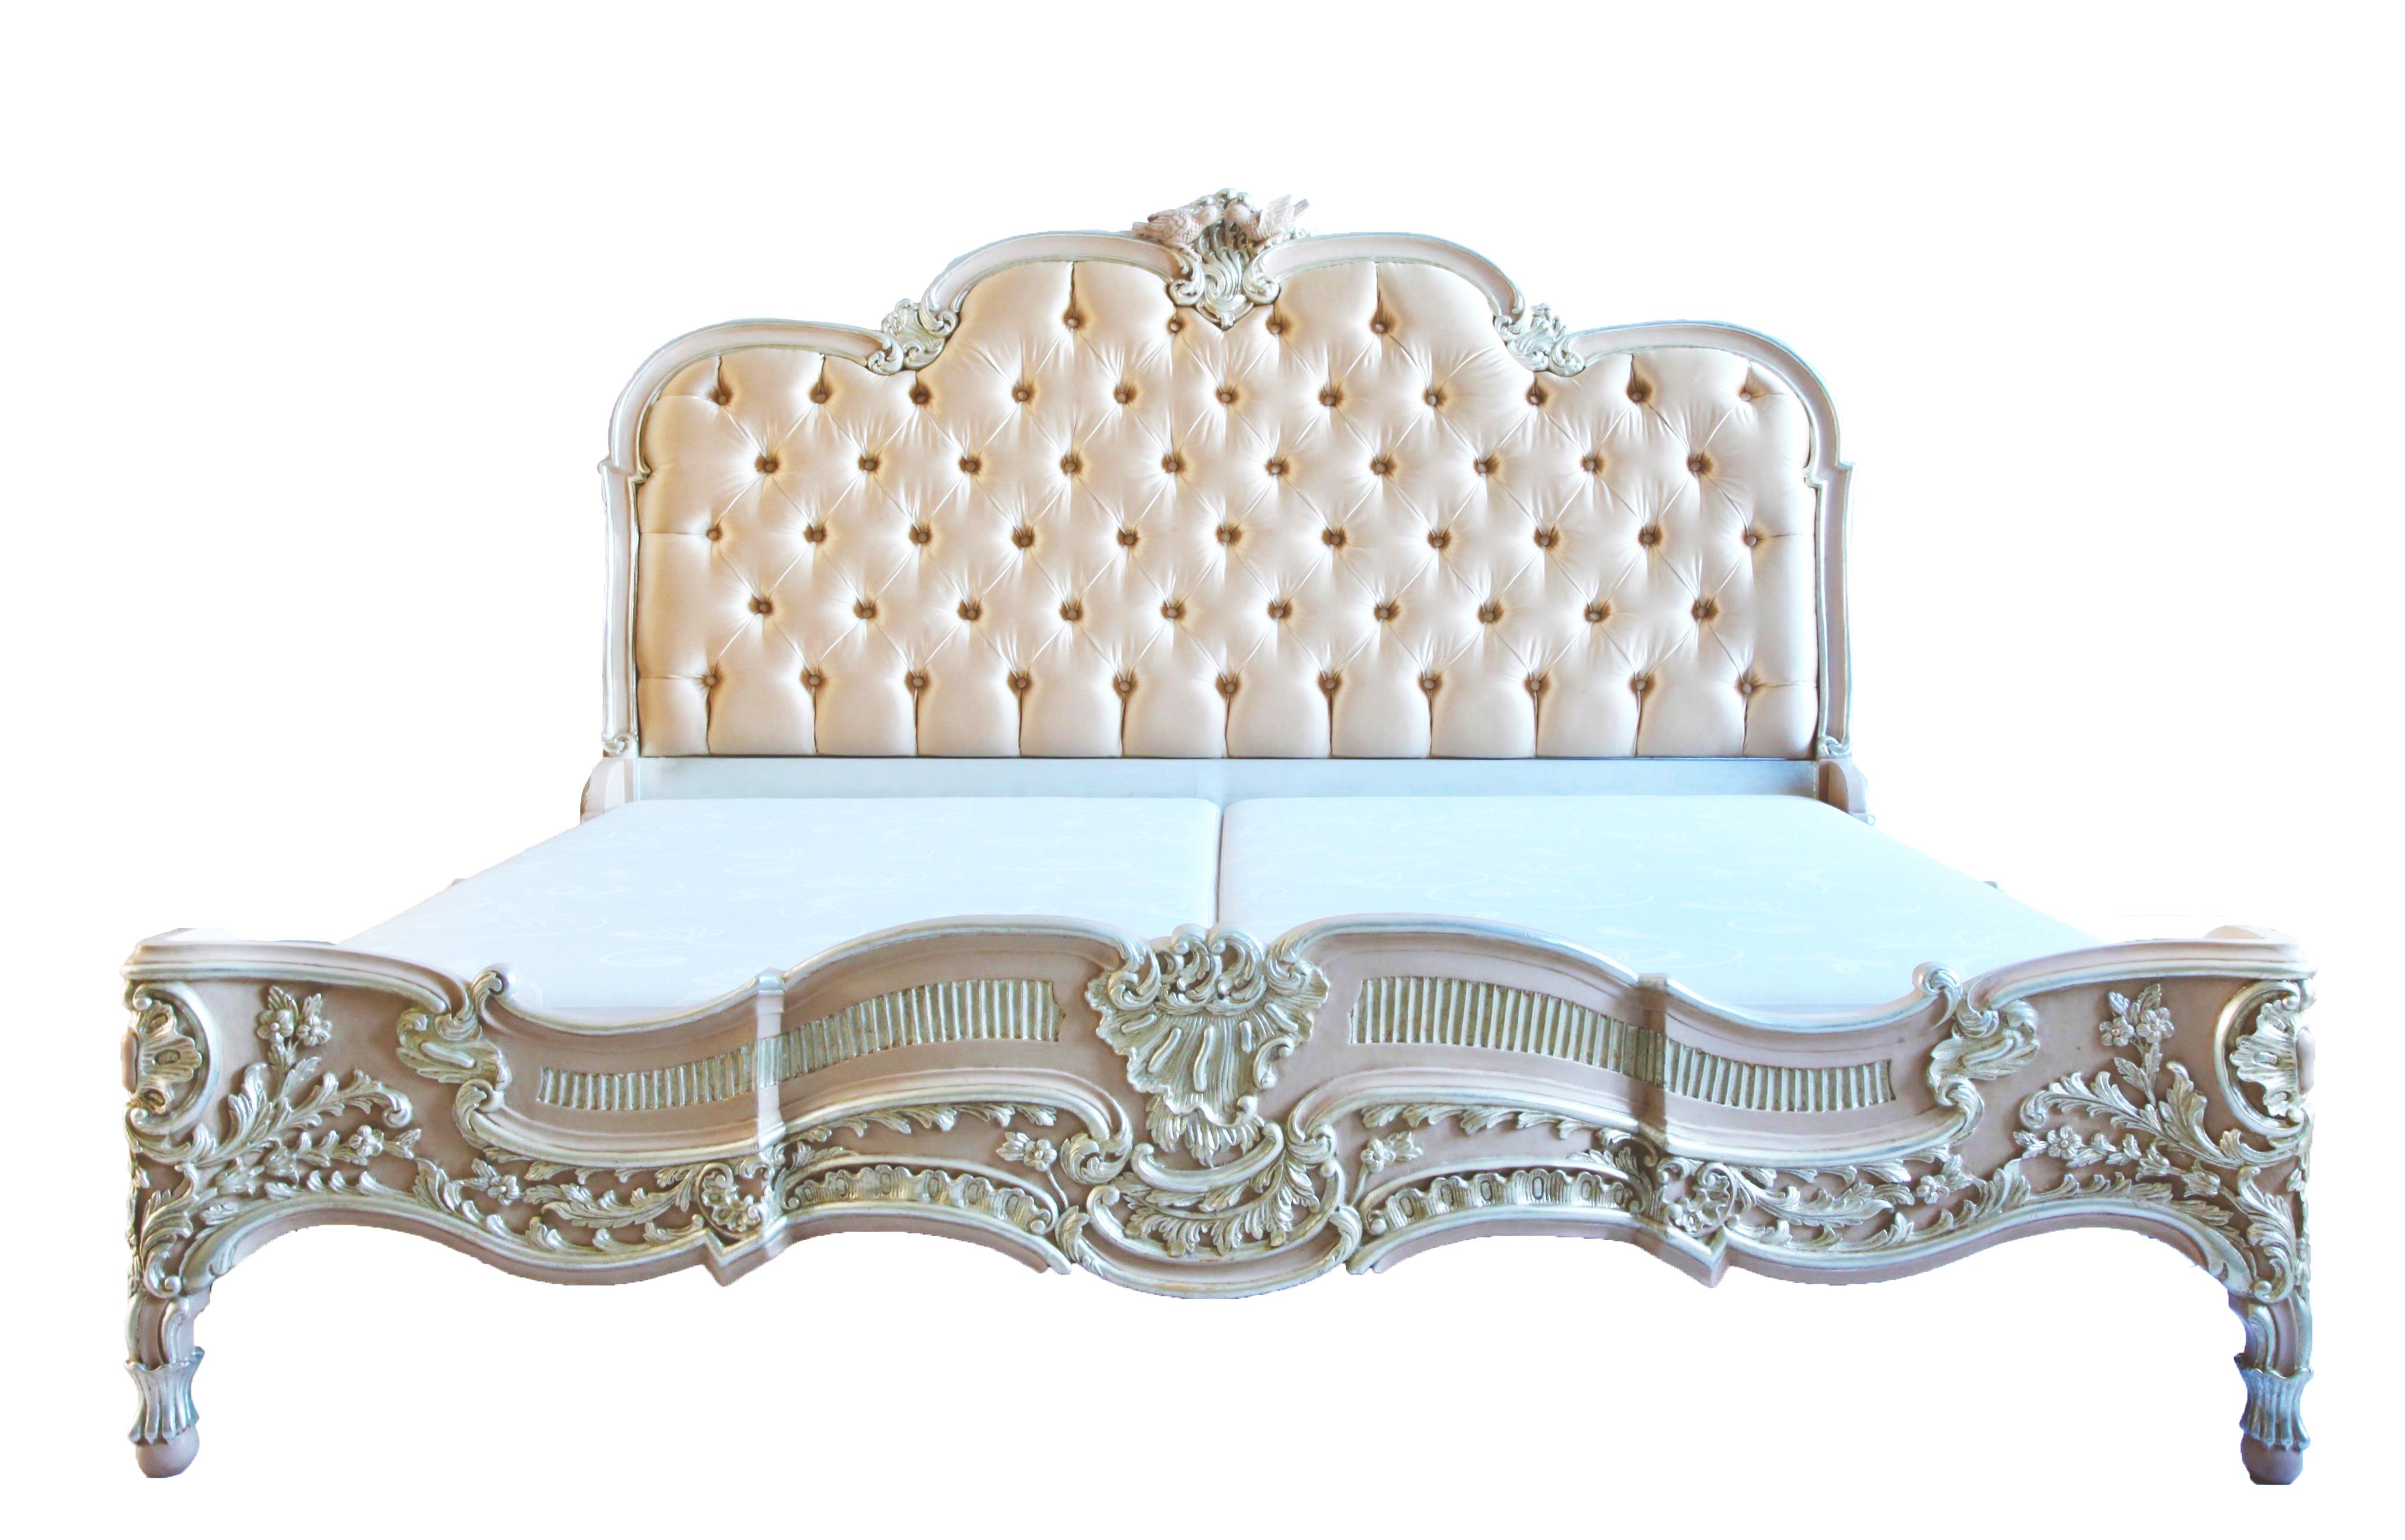 The Lit De Marriage Bed, hand carved in the Louis XV style has been modelled after one of our original pieces from the 1800s which was made in the French tradition of having a piece made to offer as a wedding present. Symbolic references to the